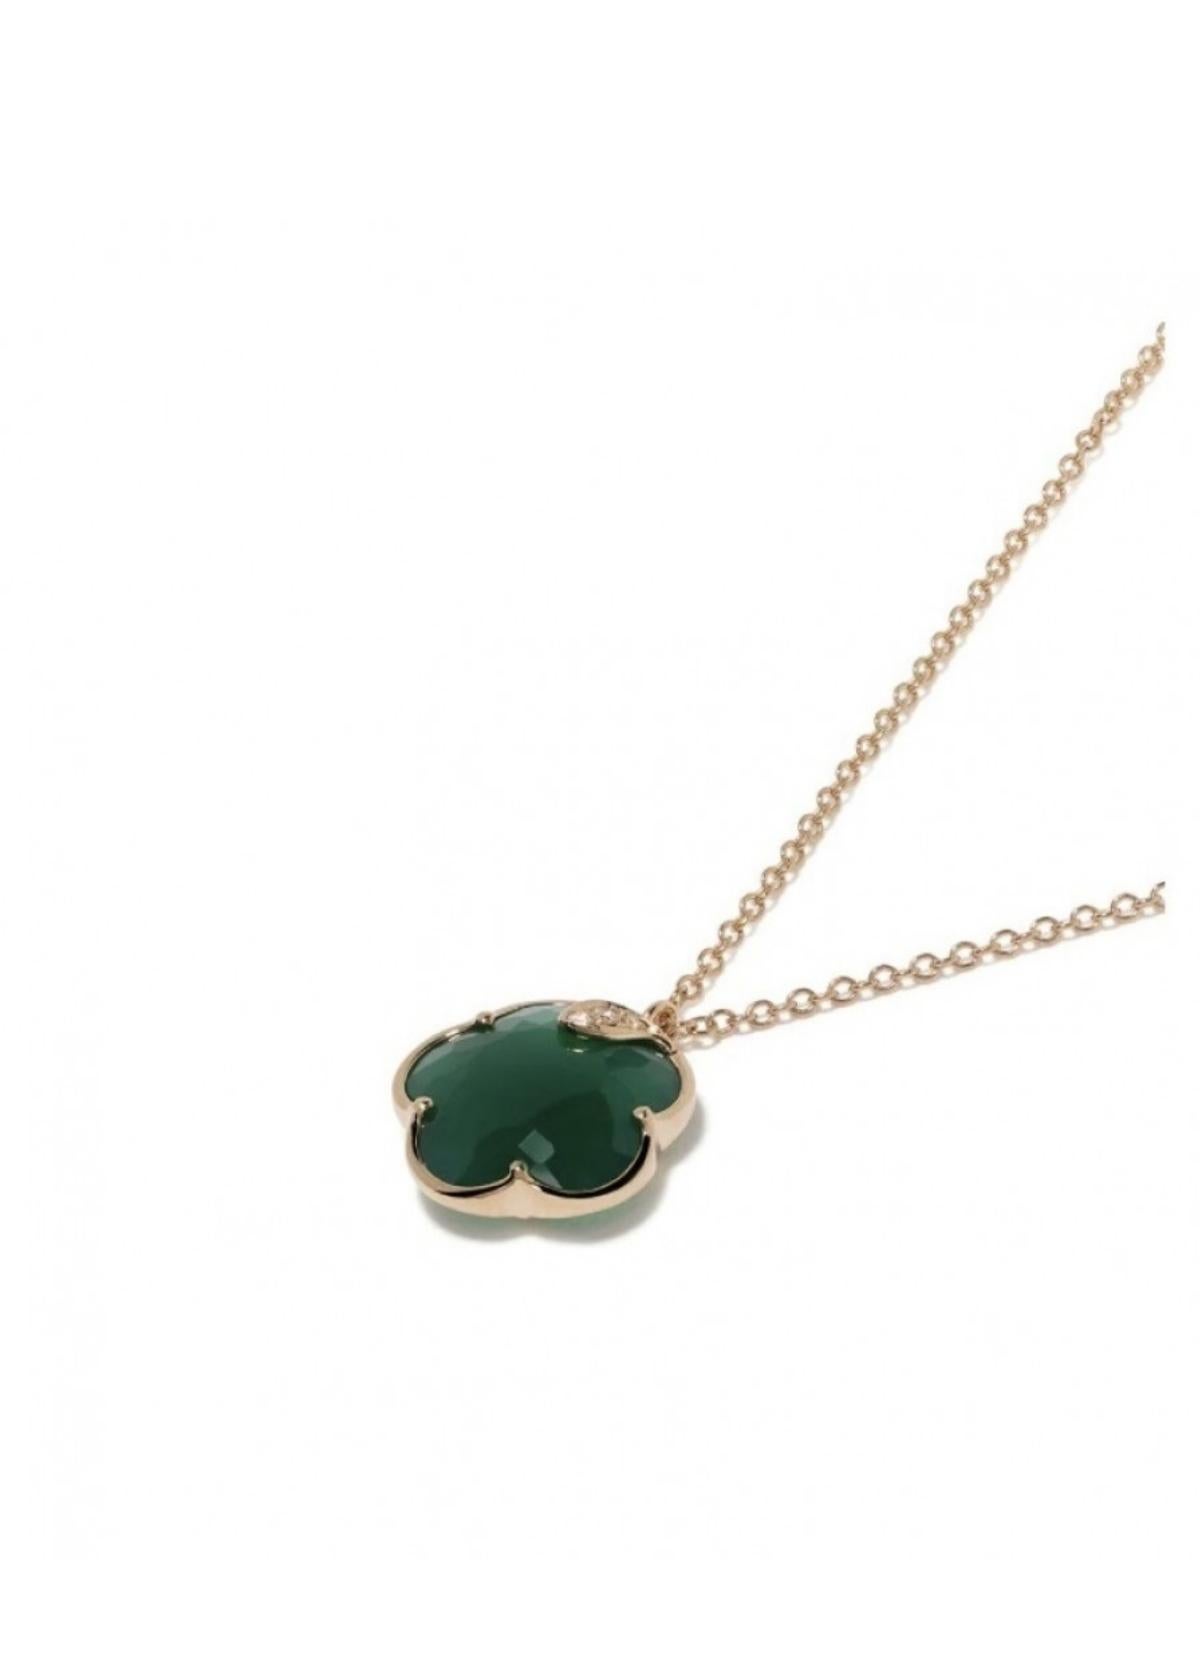 Women's Necklace in 18k Rose Gold with Green Agate and Diamonds '16138R' For Sale